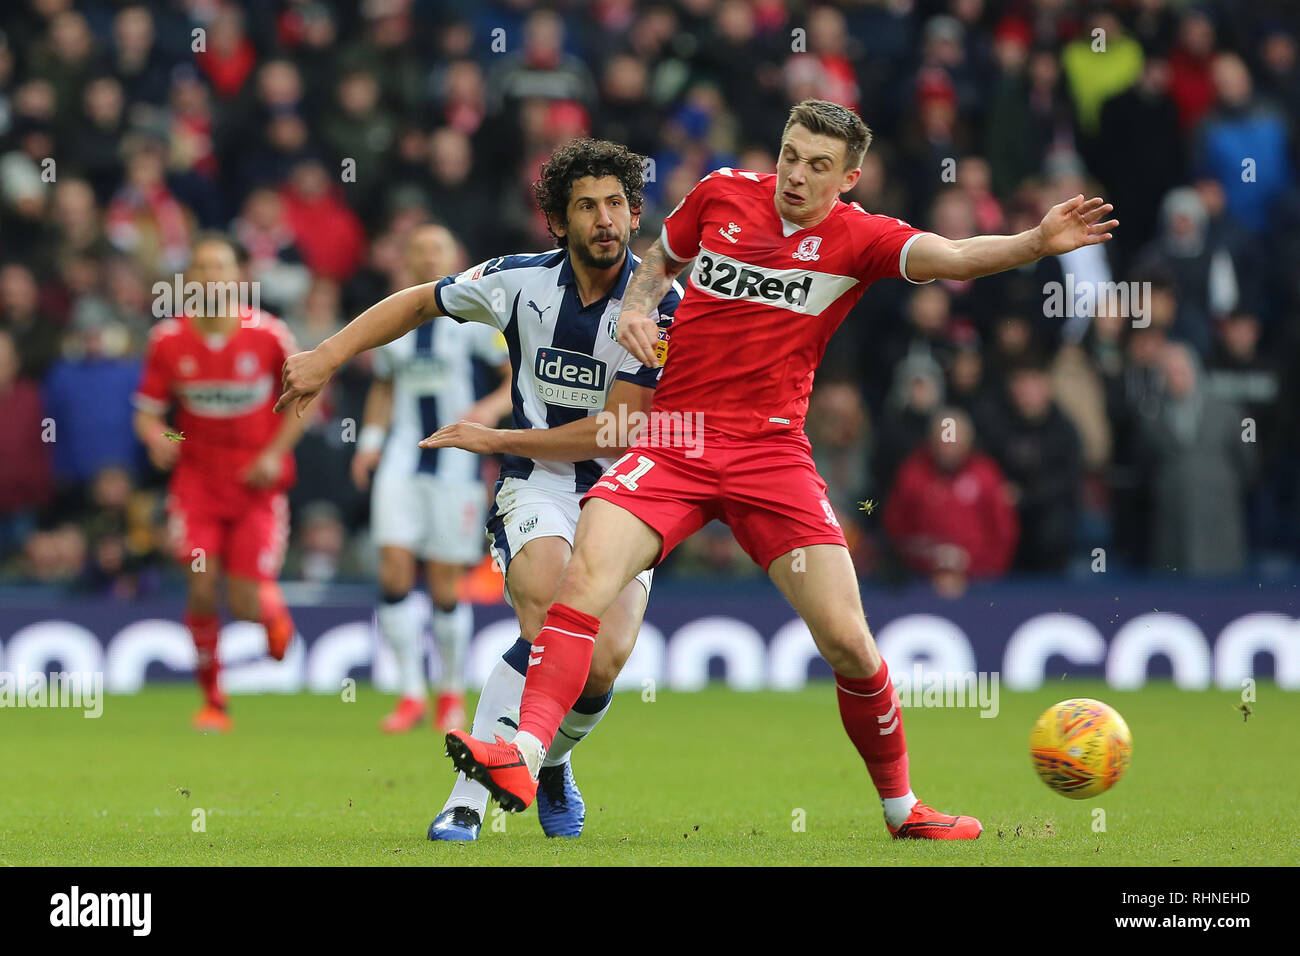 West Bromwich, UK. 2 February 2019.  Jordan Hugill of Middlesbrough and Ahmed Hegazy of West Bromwich Albion during the Sky Bet Championship match between West Bromwich Albion and Middlesbrough at The Hawthorns, West Bromwich on Saturday 2nd February 2019.  (MI News | Alamy) Credit: MI News & Sport /Alamy Live News Stock Photo